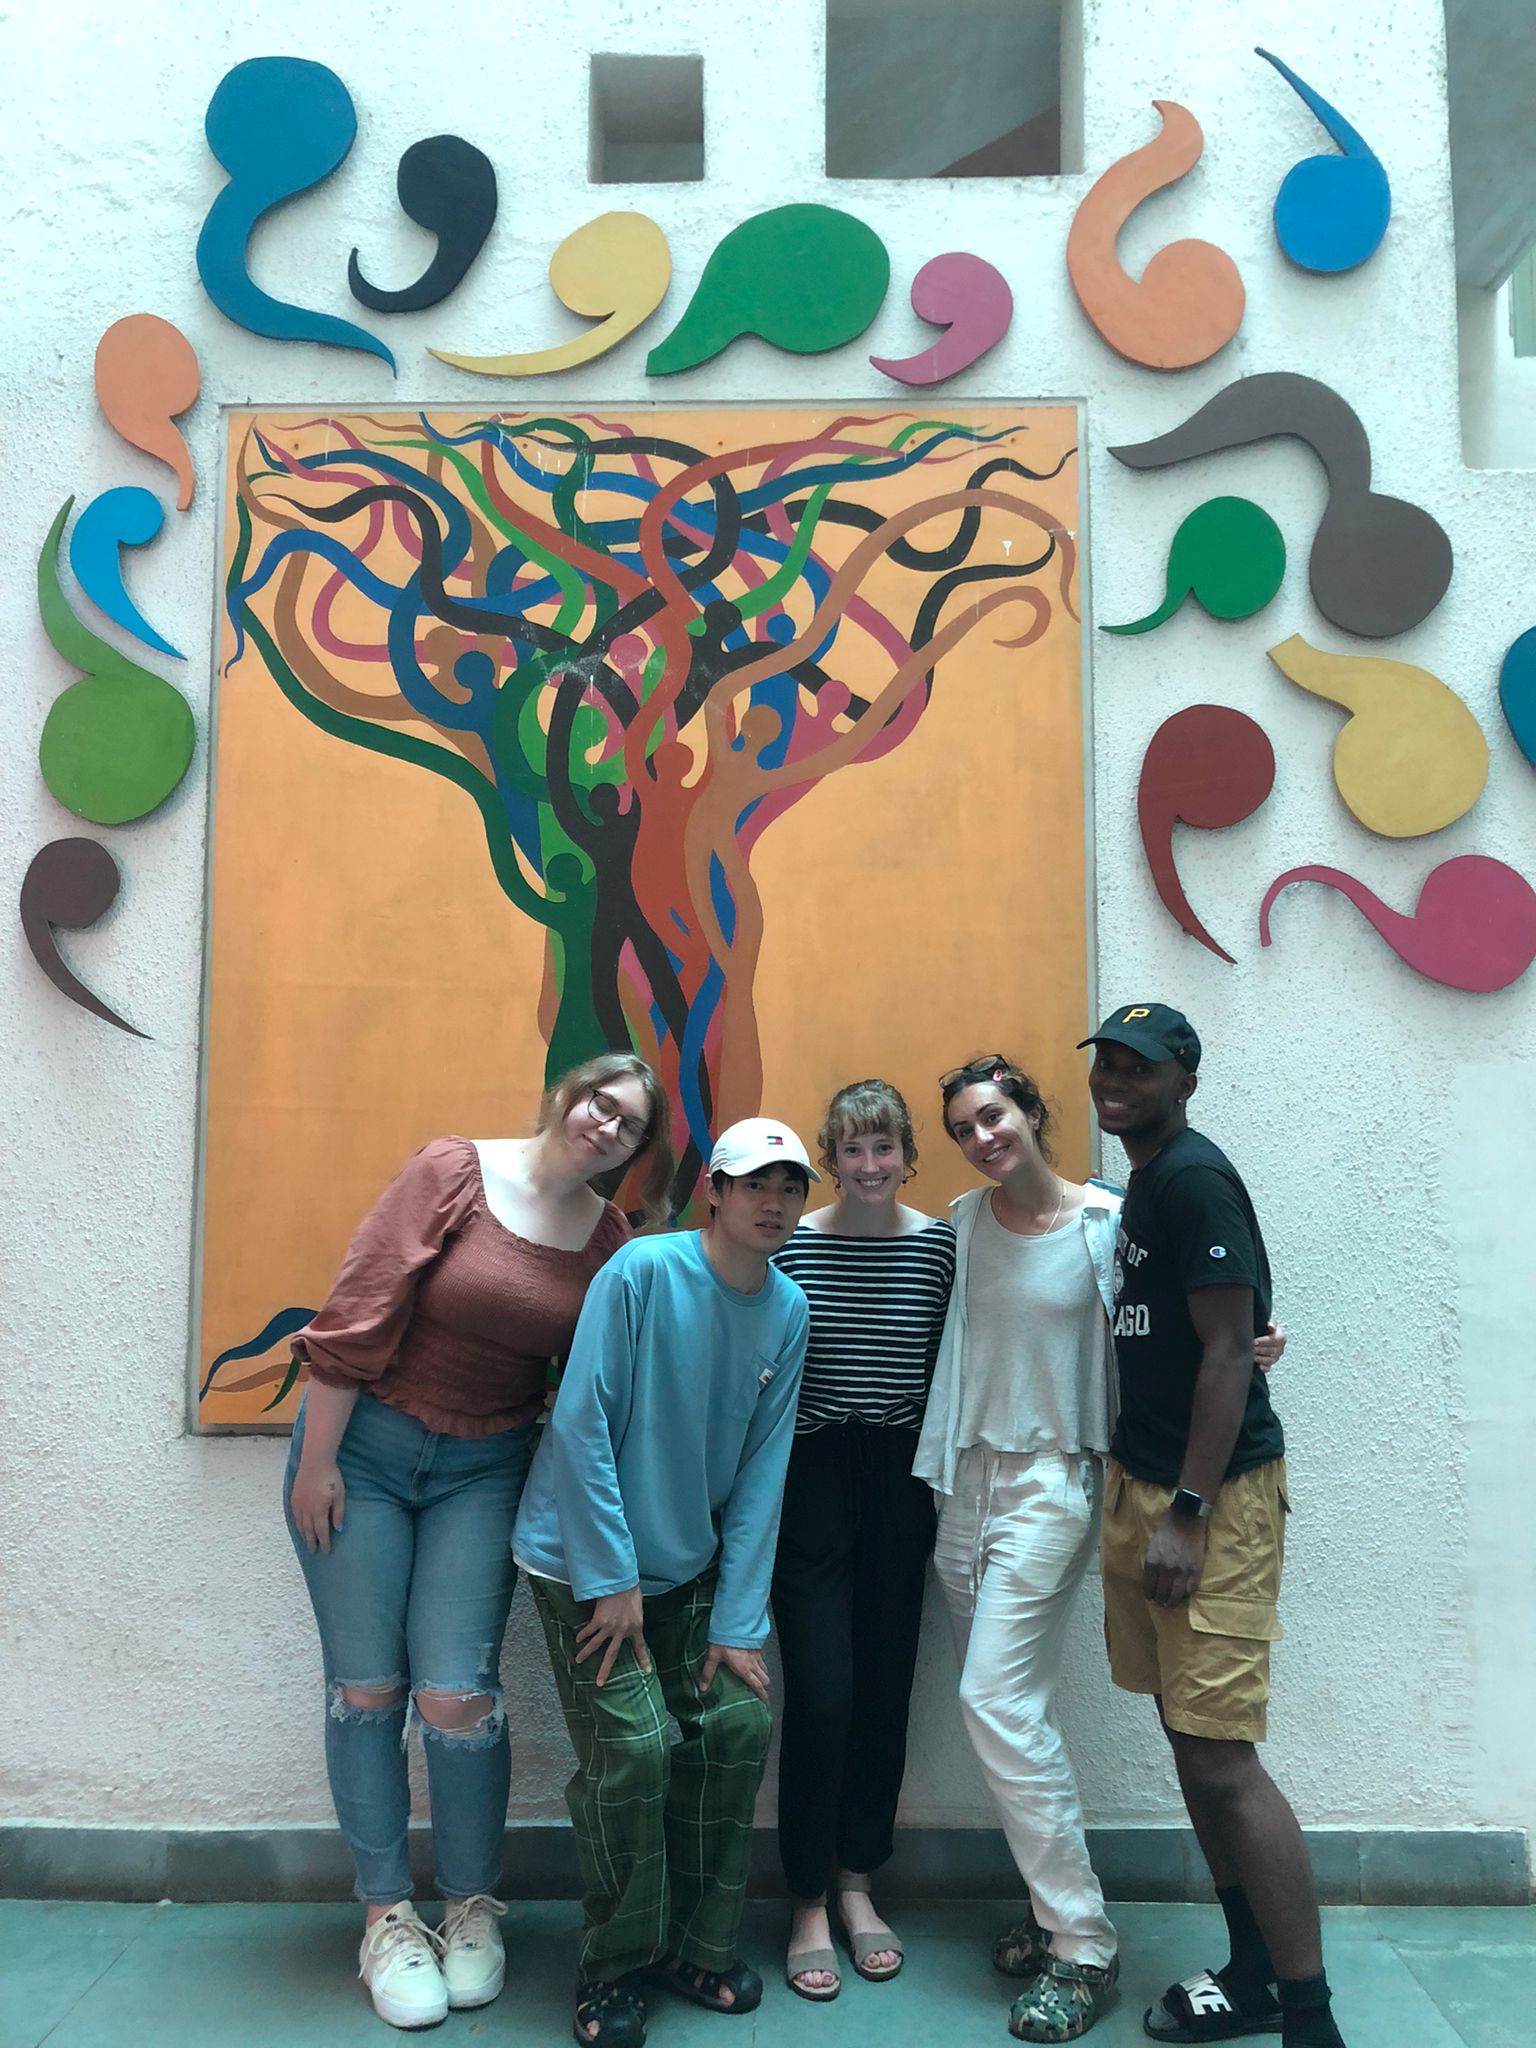 Group of people standing in front of abstract art